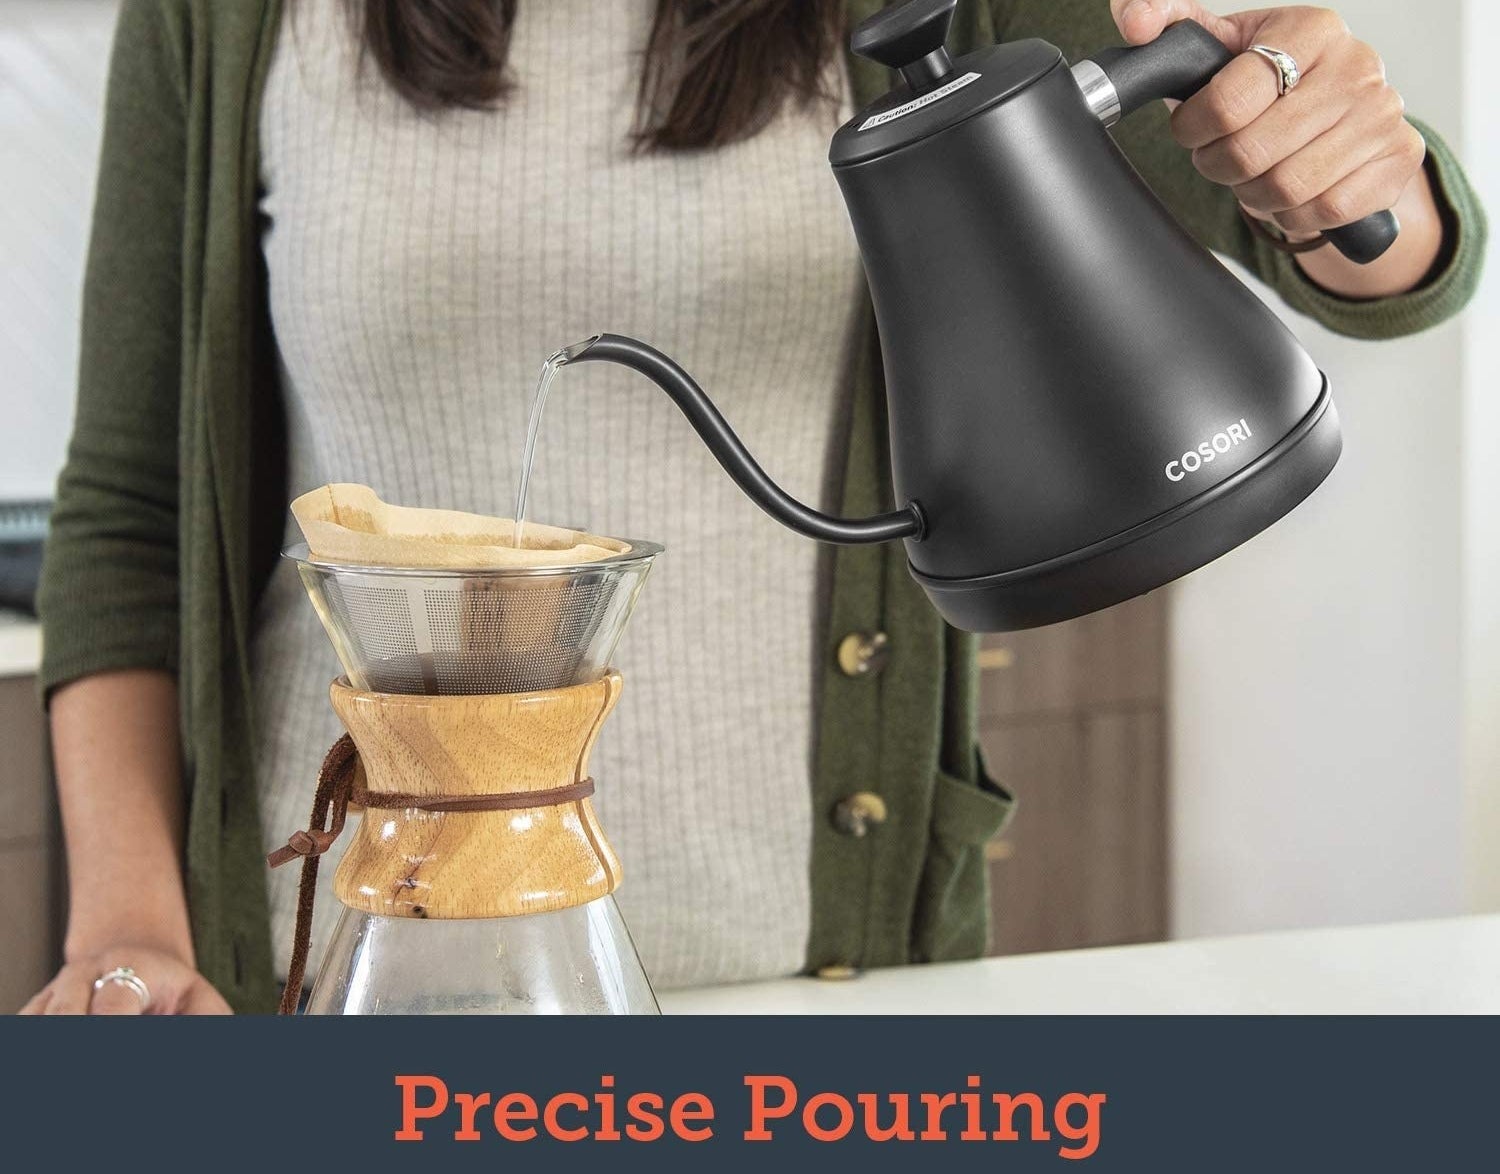 someone using the gooseneck kettle to make pourover coffee